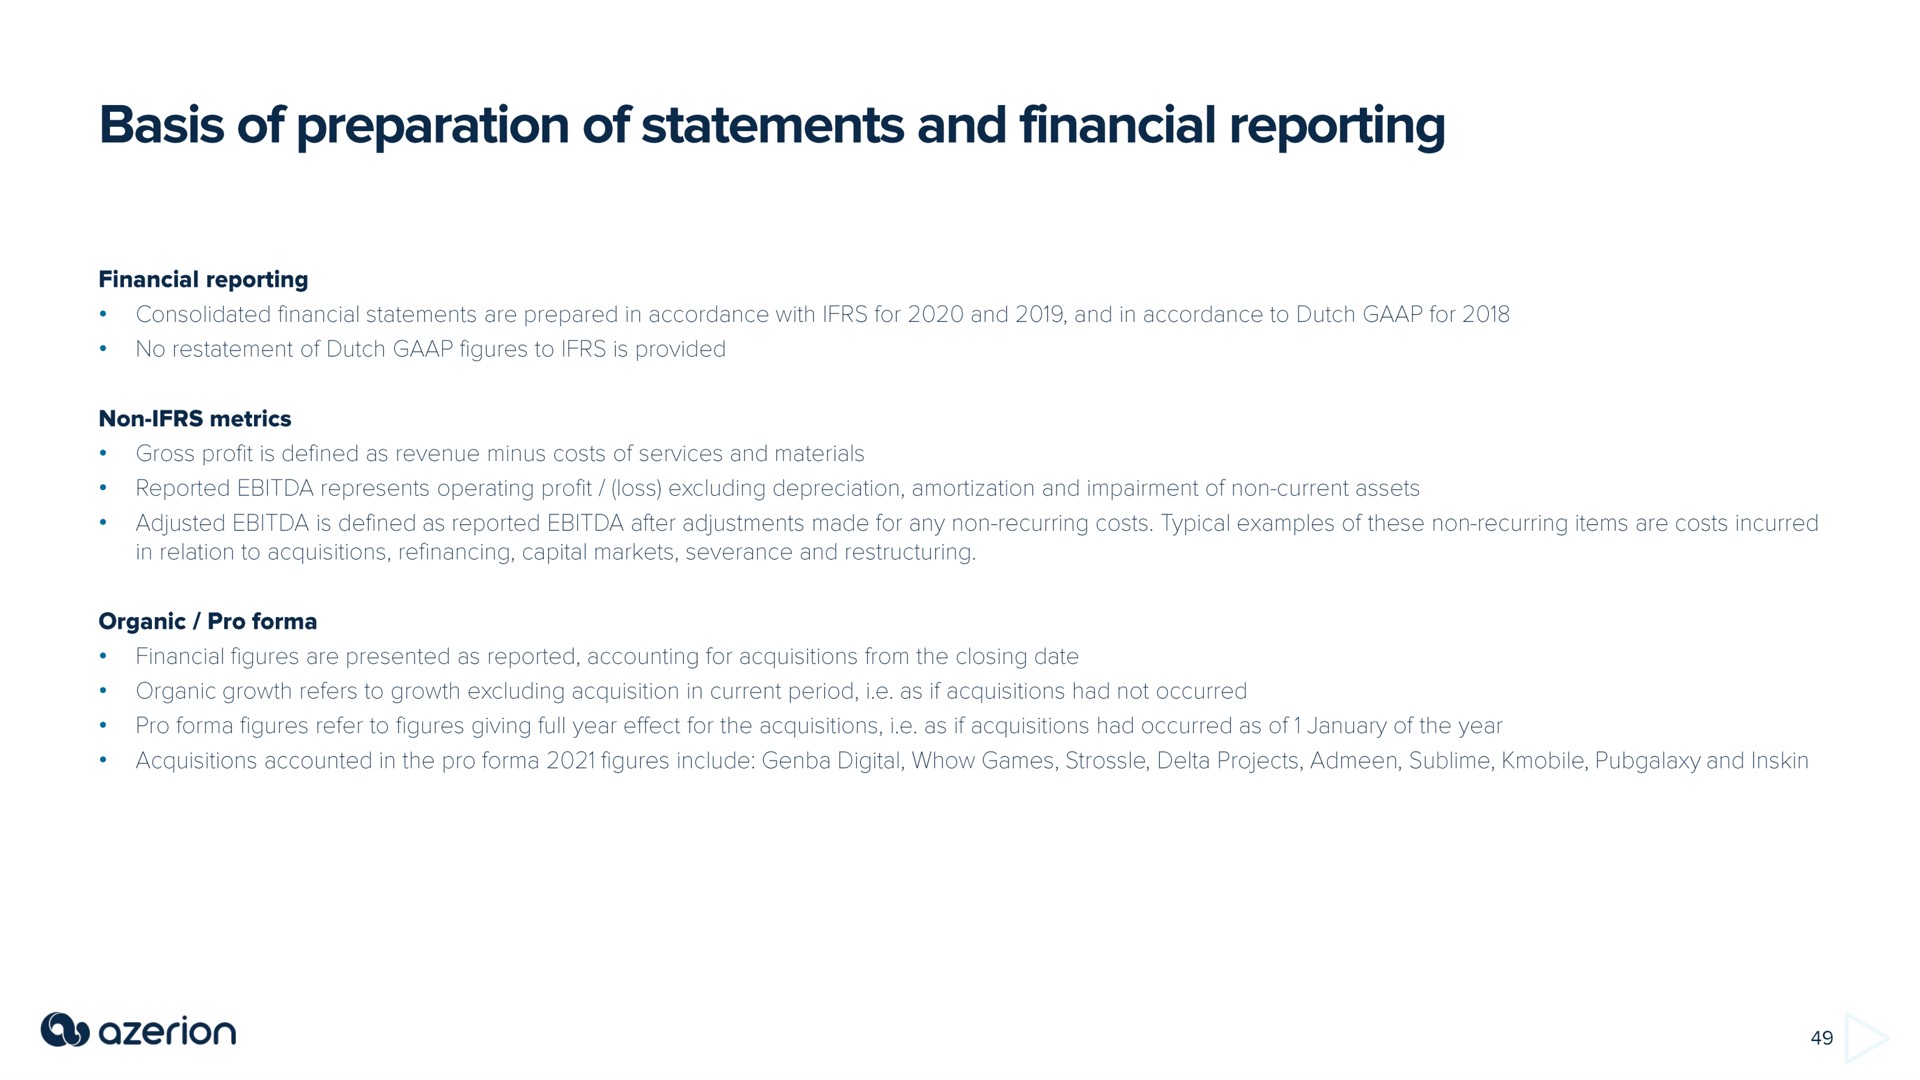 basis of preparation of statements and financial reporting | Azerion